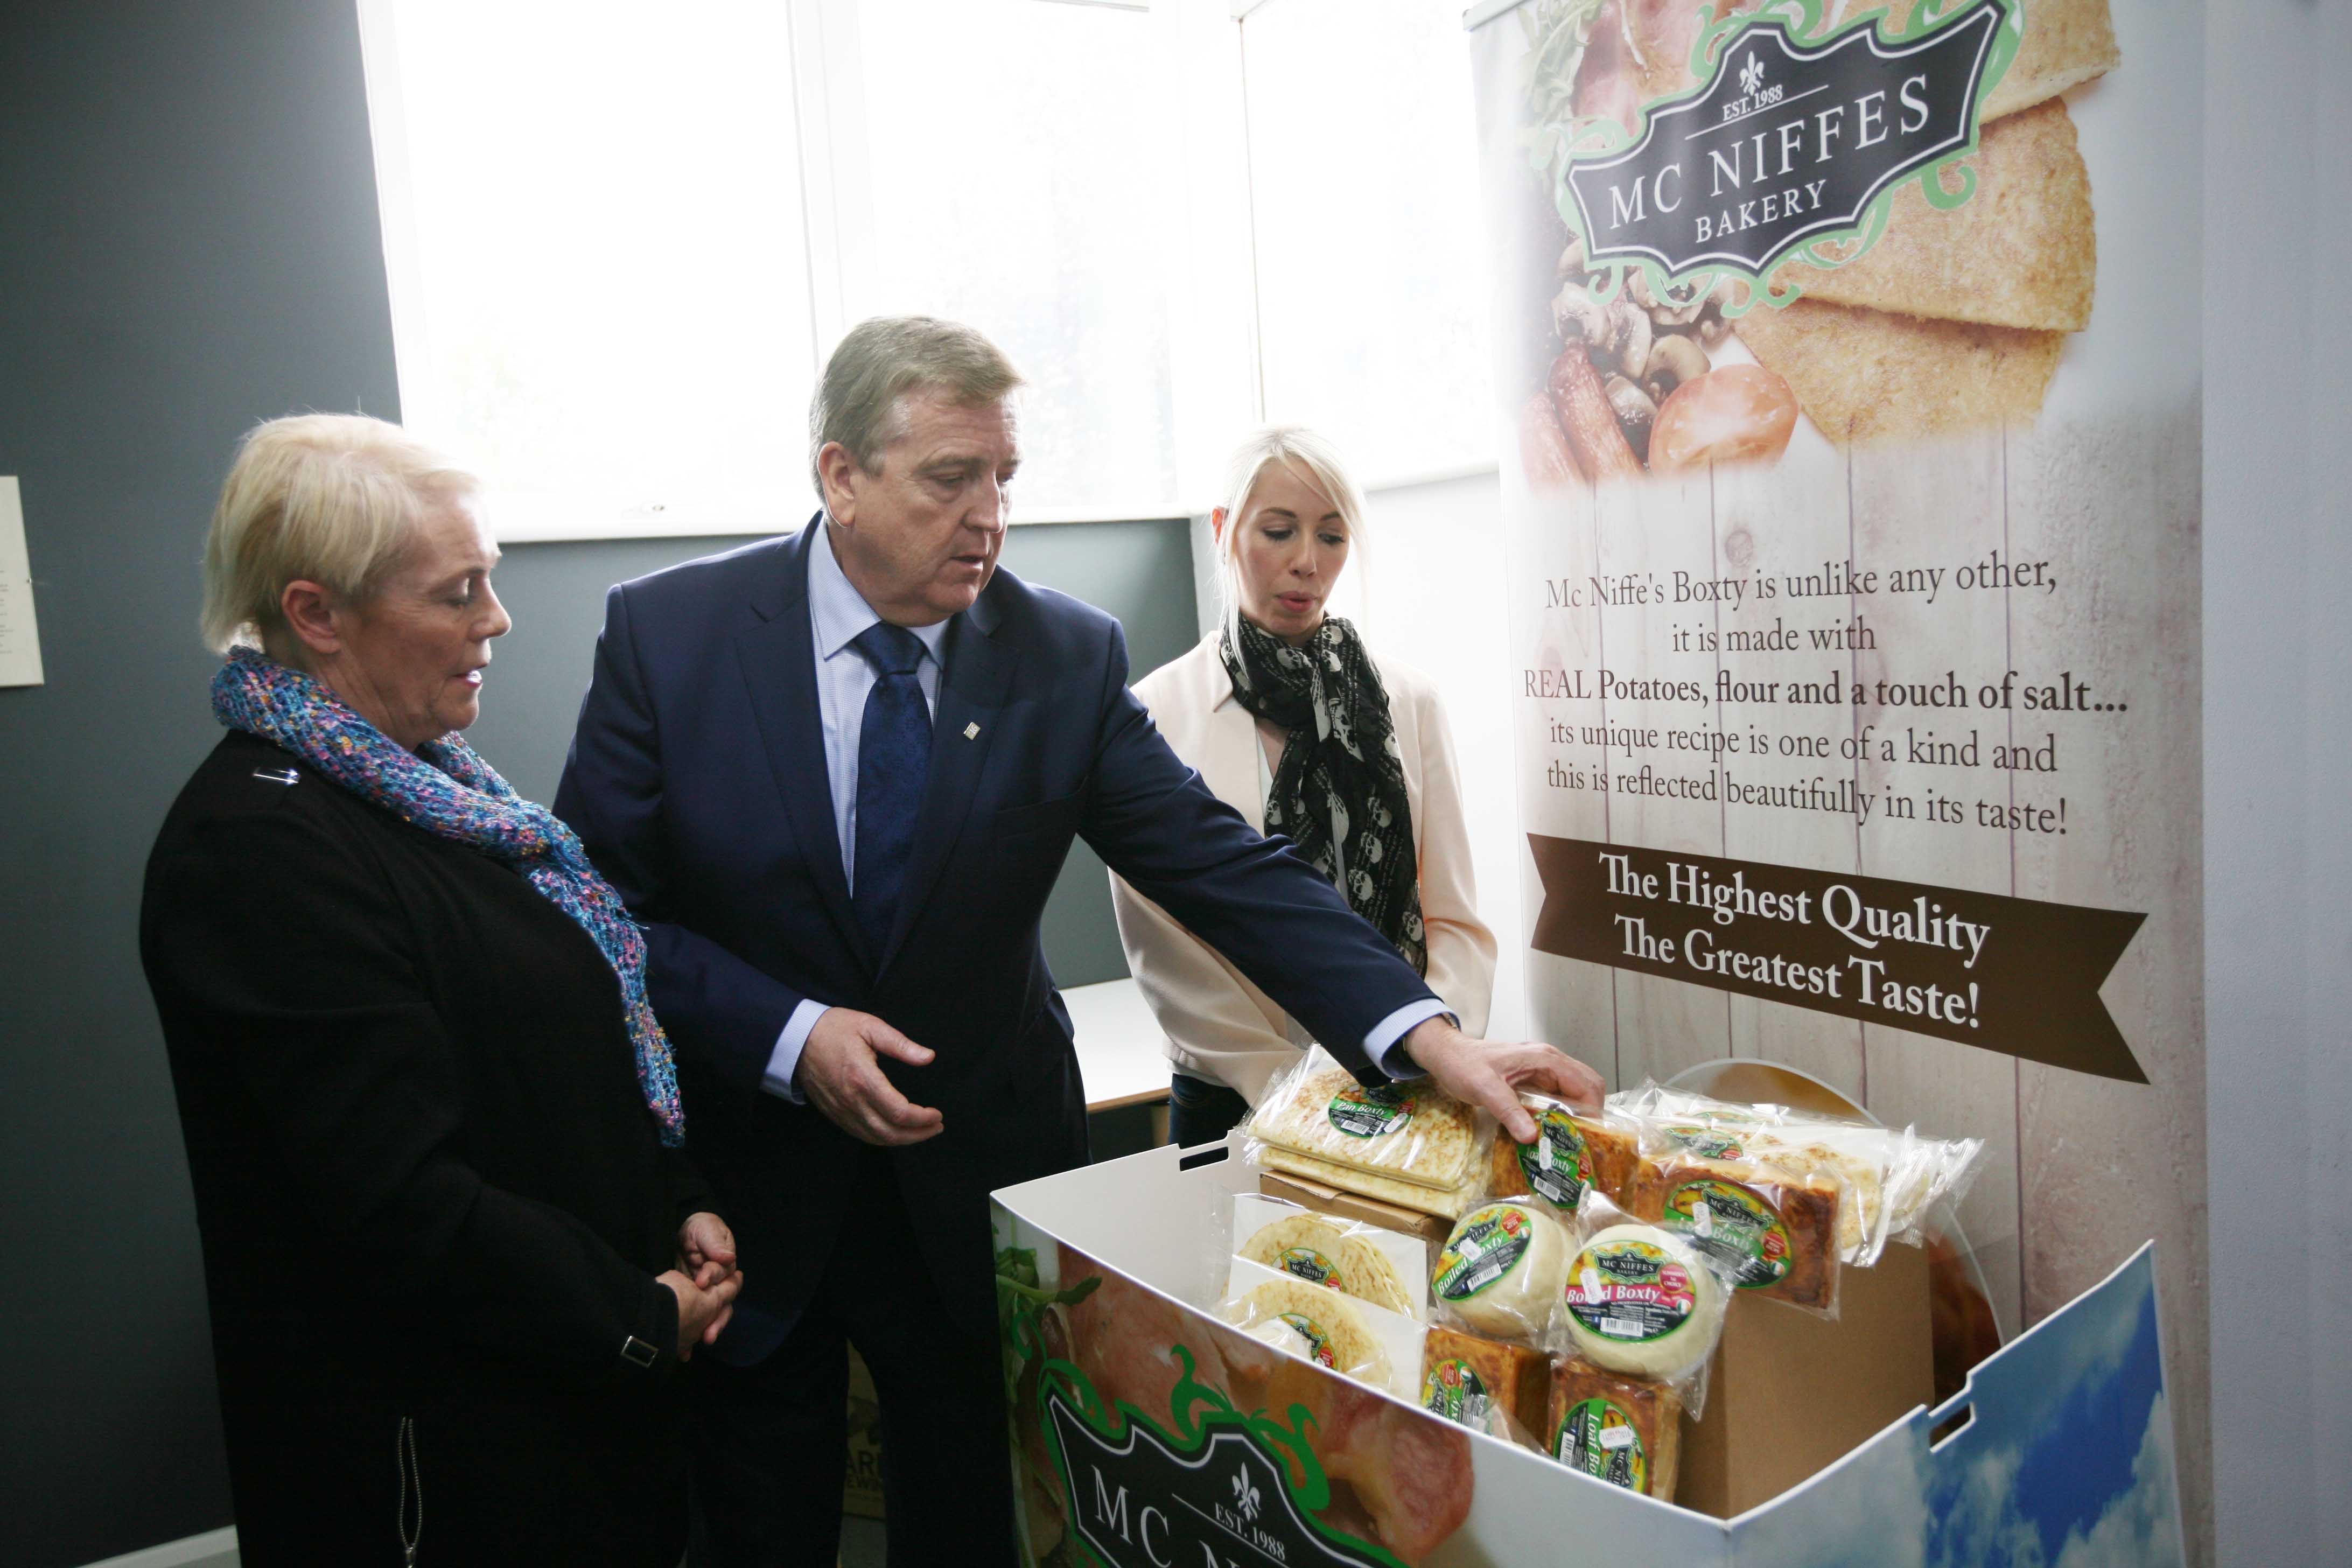 Minister Breen meets Mc Niffes Bakery